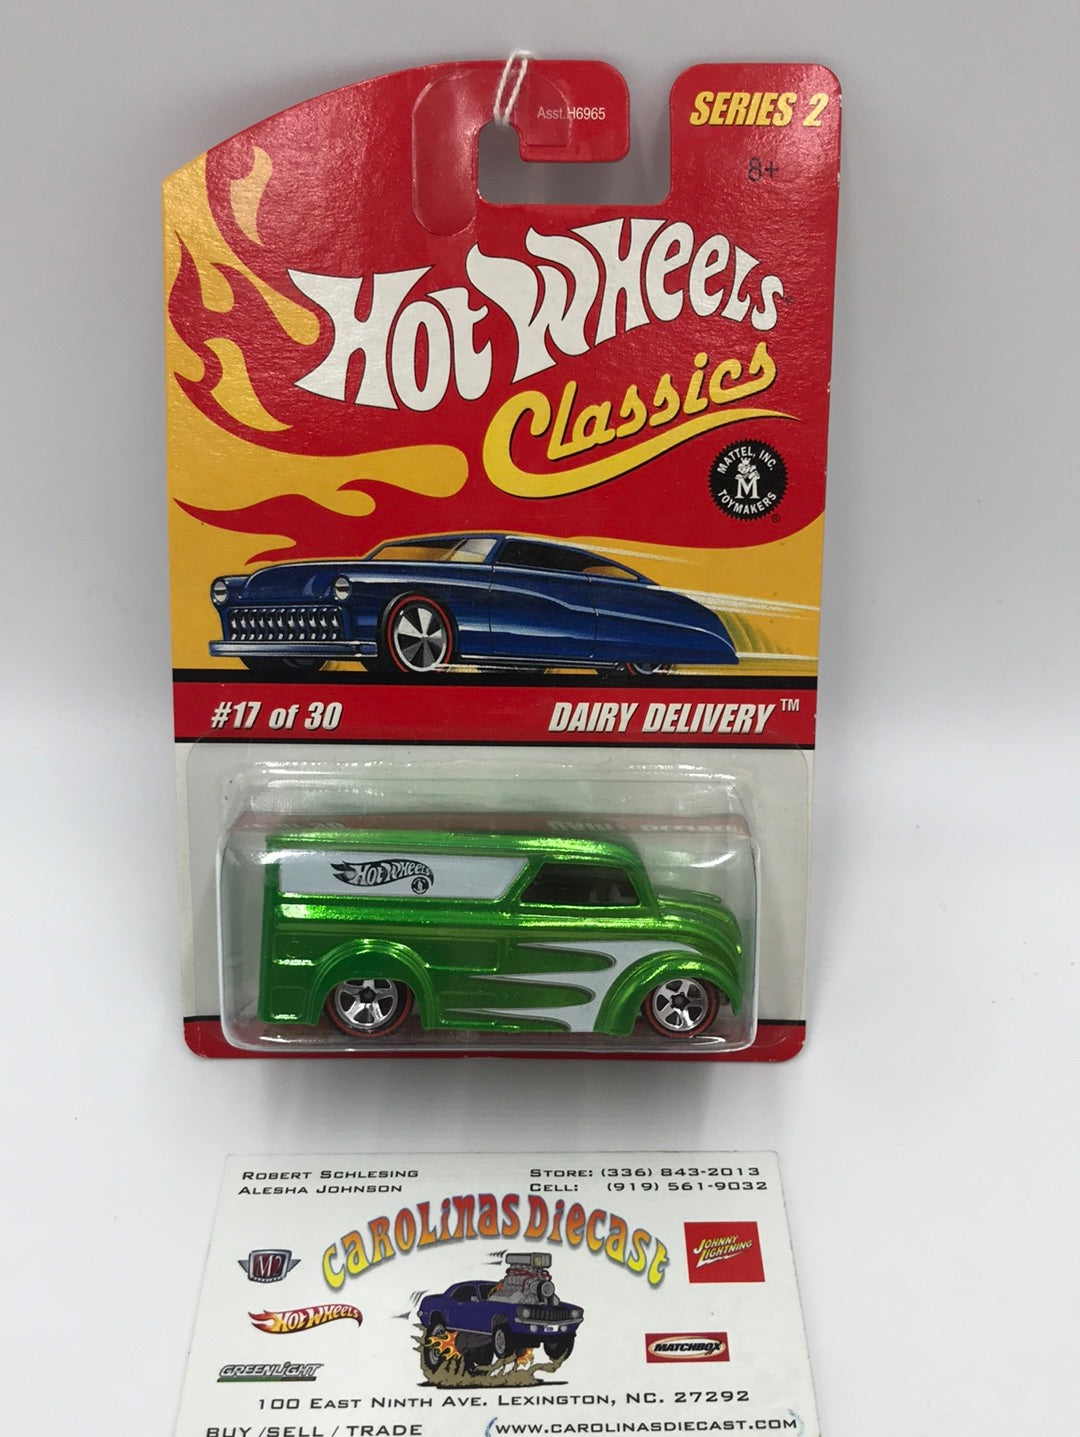 Hot wheels classics series 2 #17 of 30 Dairy Delivery green FF4